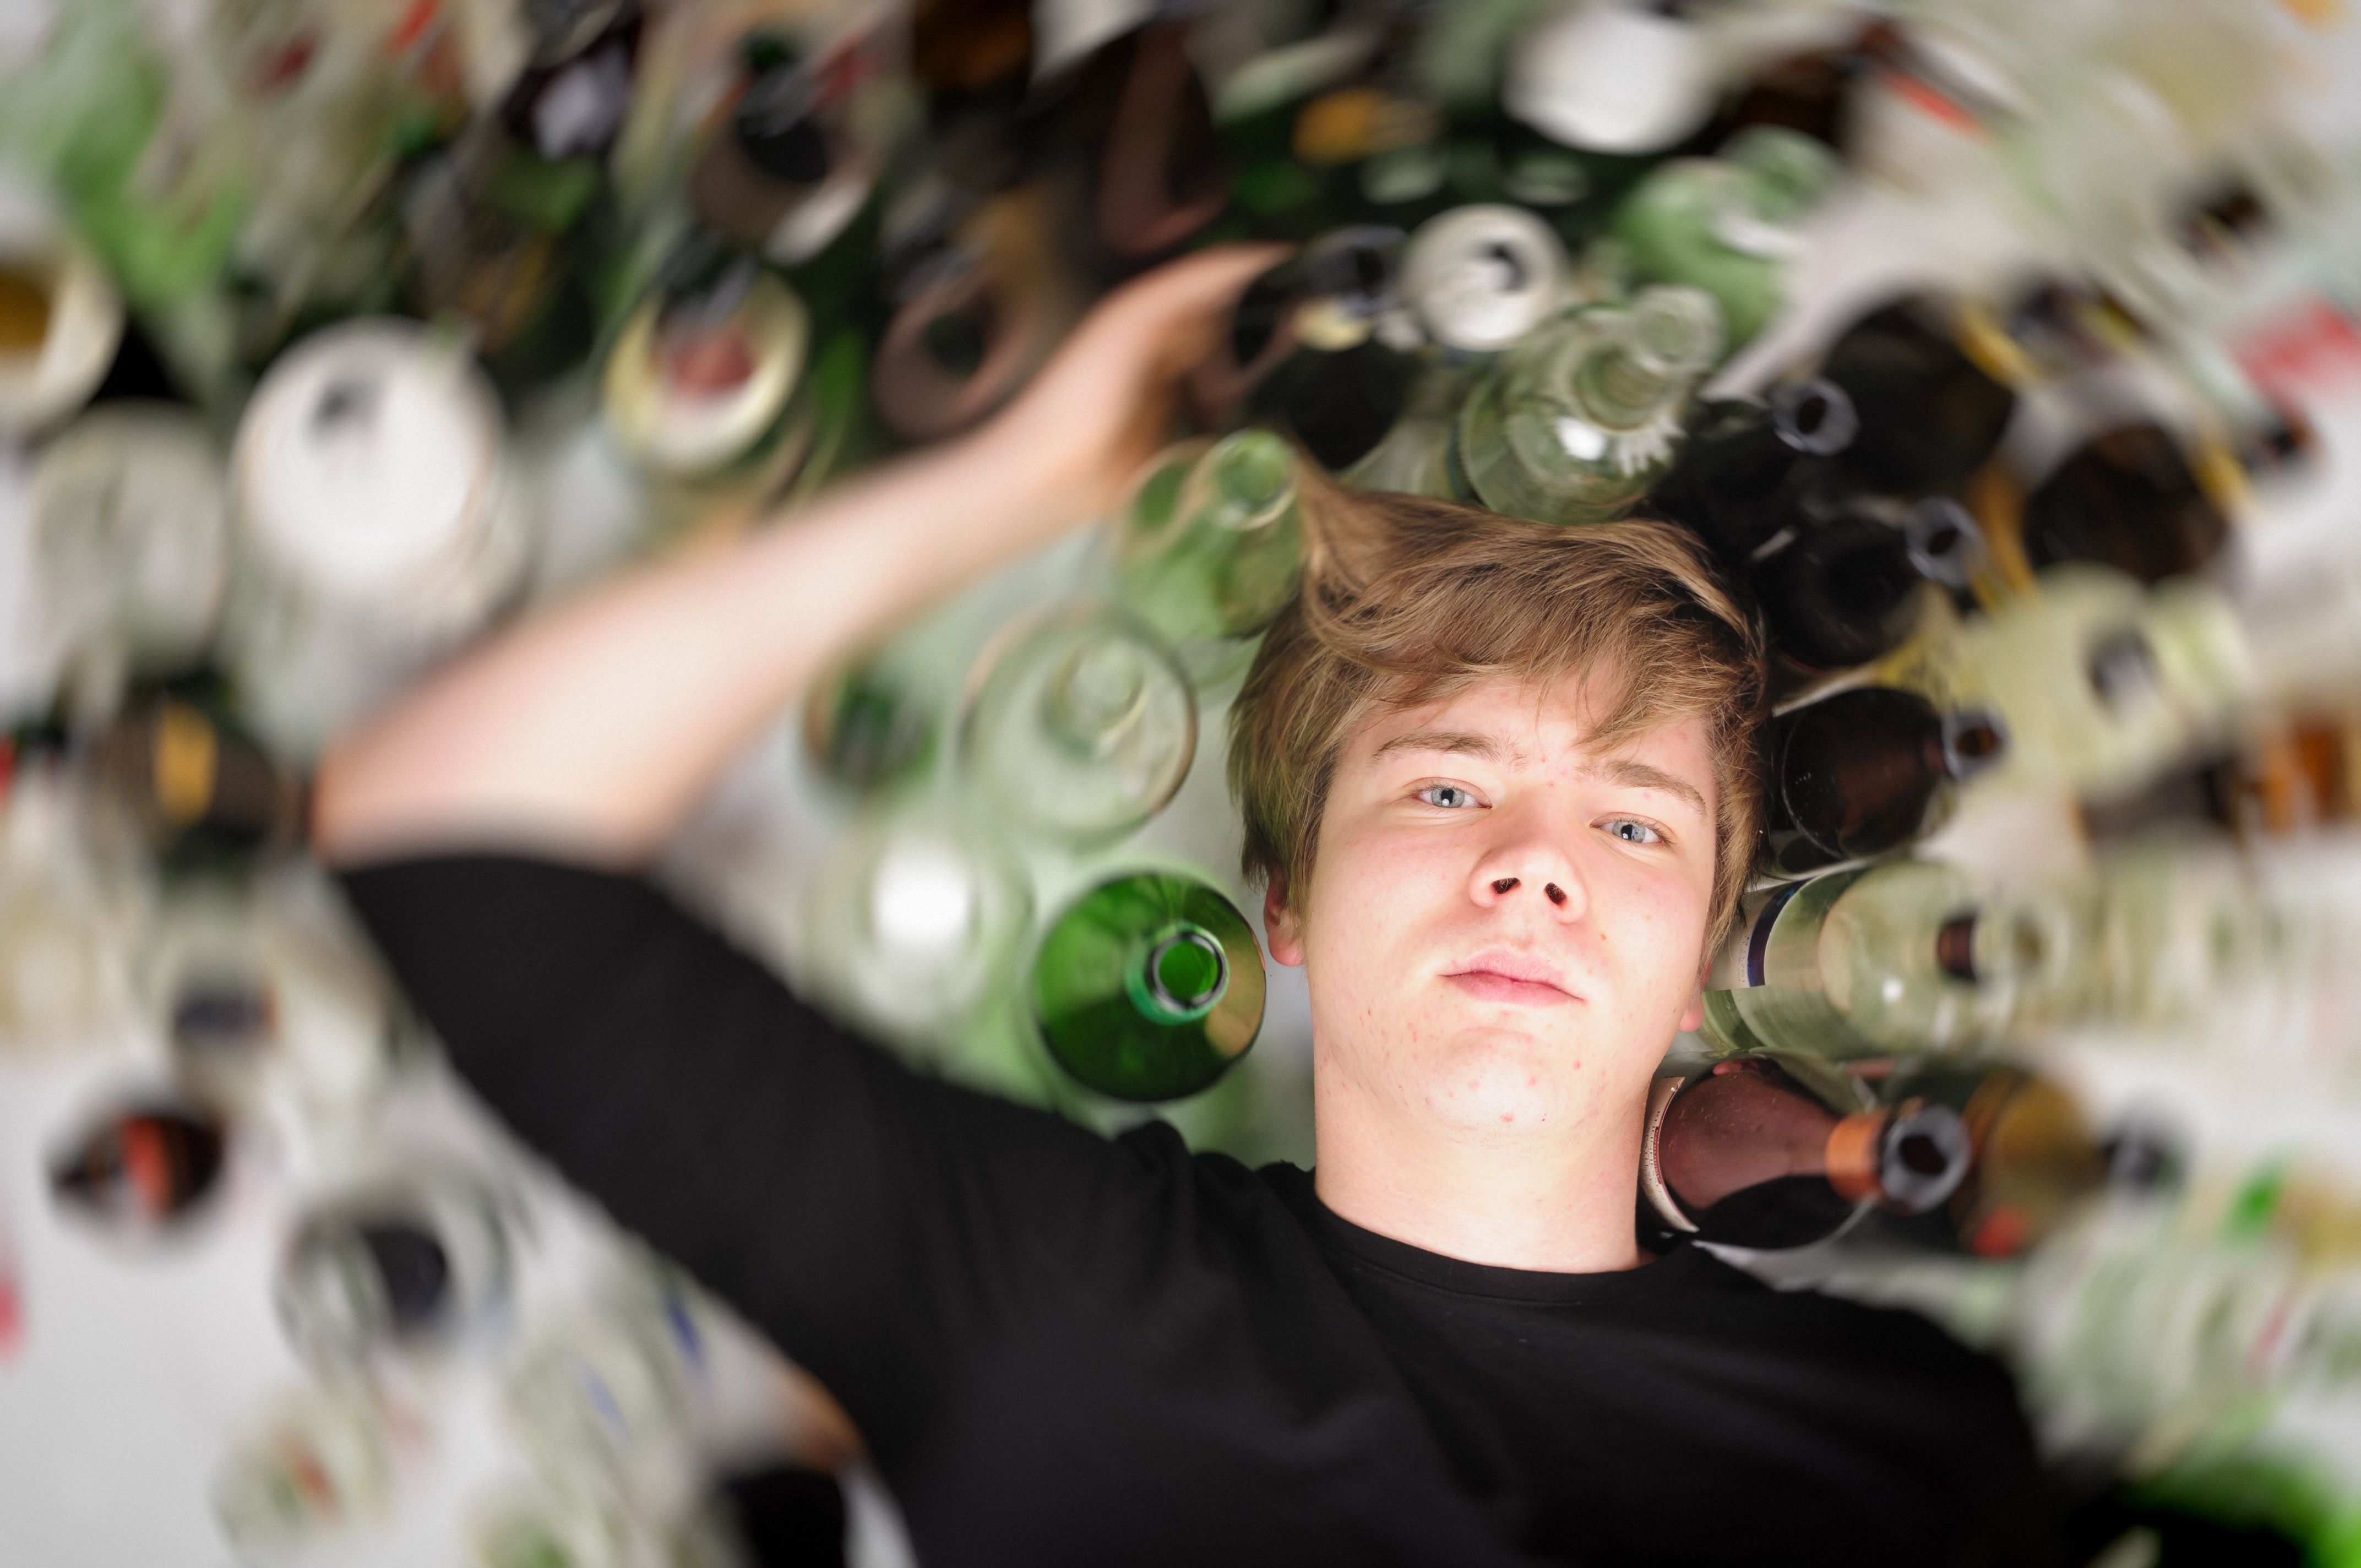 teenage boy surrounded by glass bottles